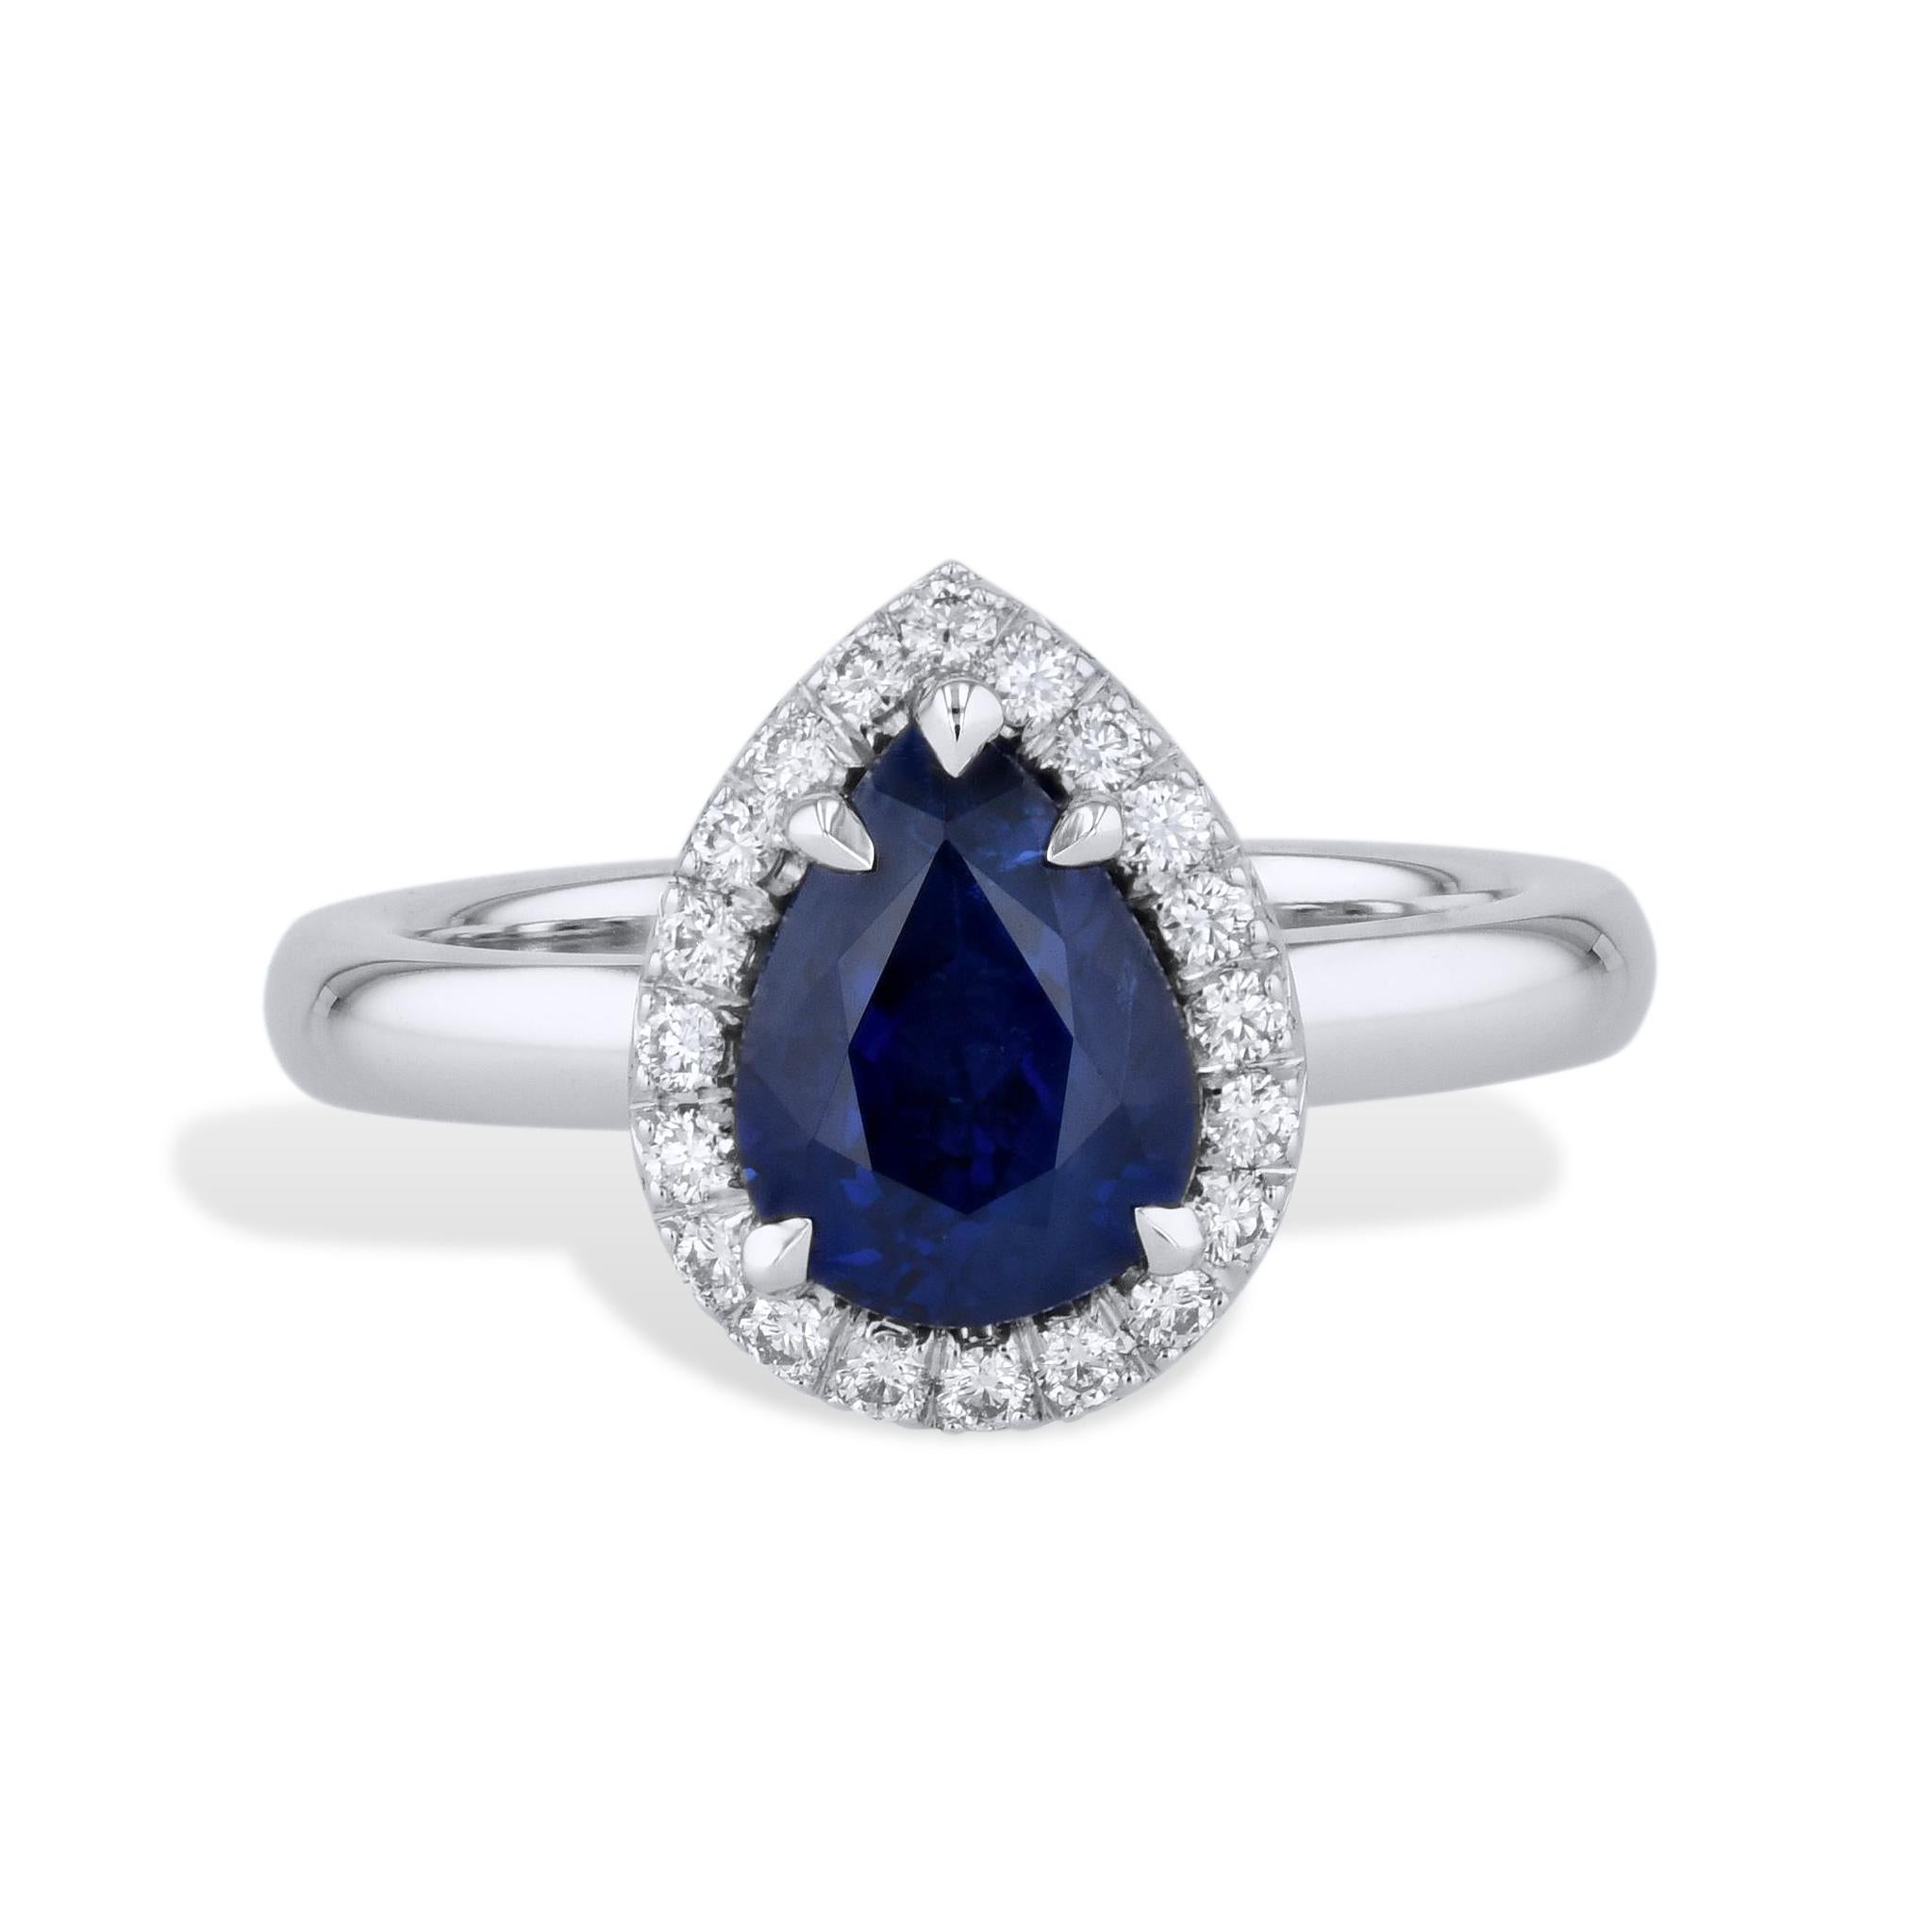 Handmade Royal Blue Pear Shaped Sapphire Pave Diamond Platinum Ring In New Condition For Sale In Miami, FL